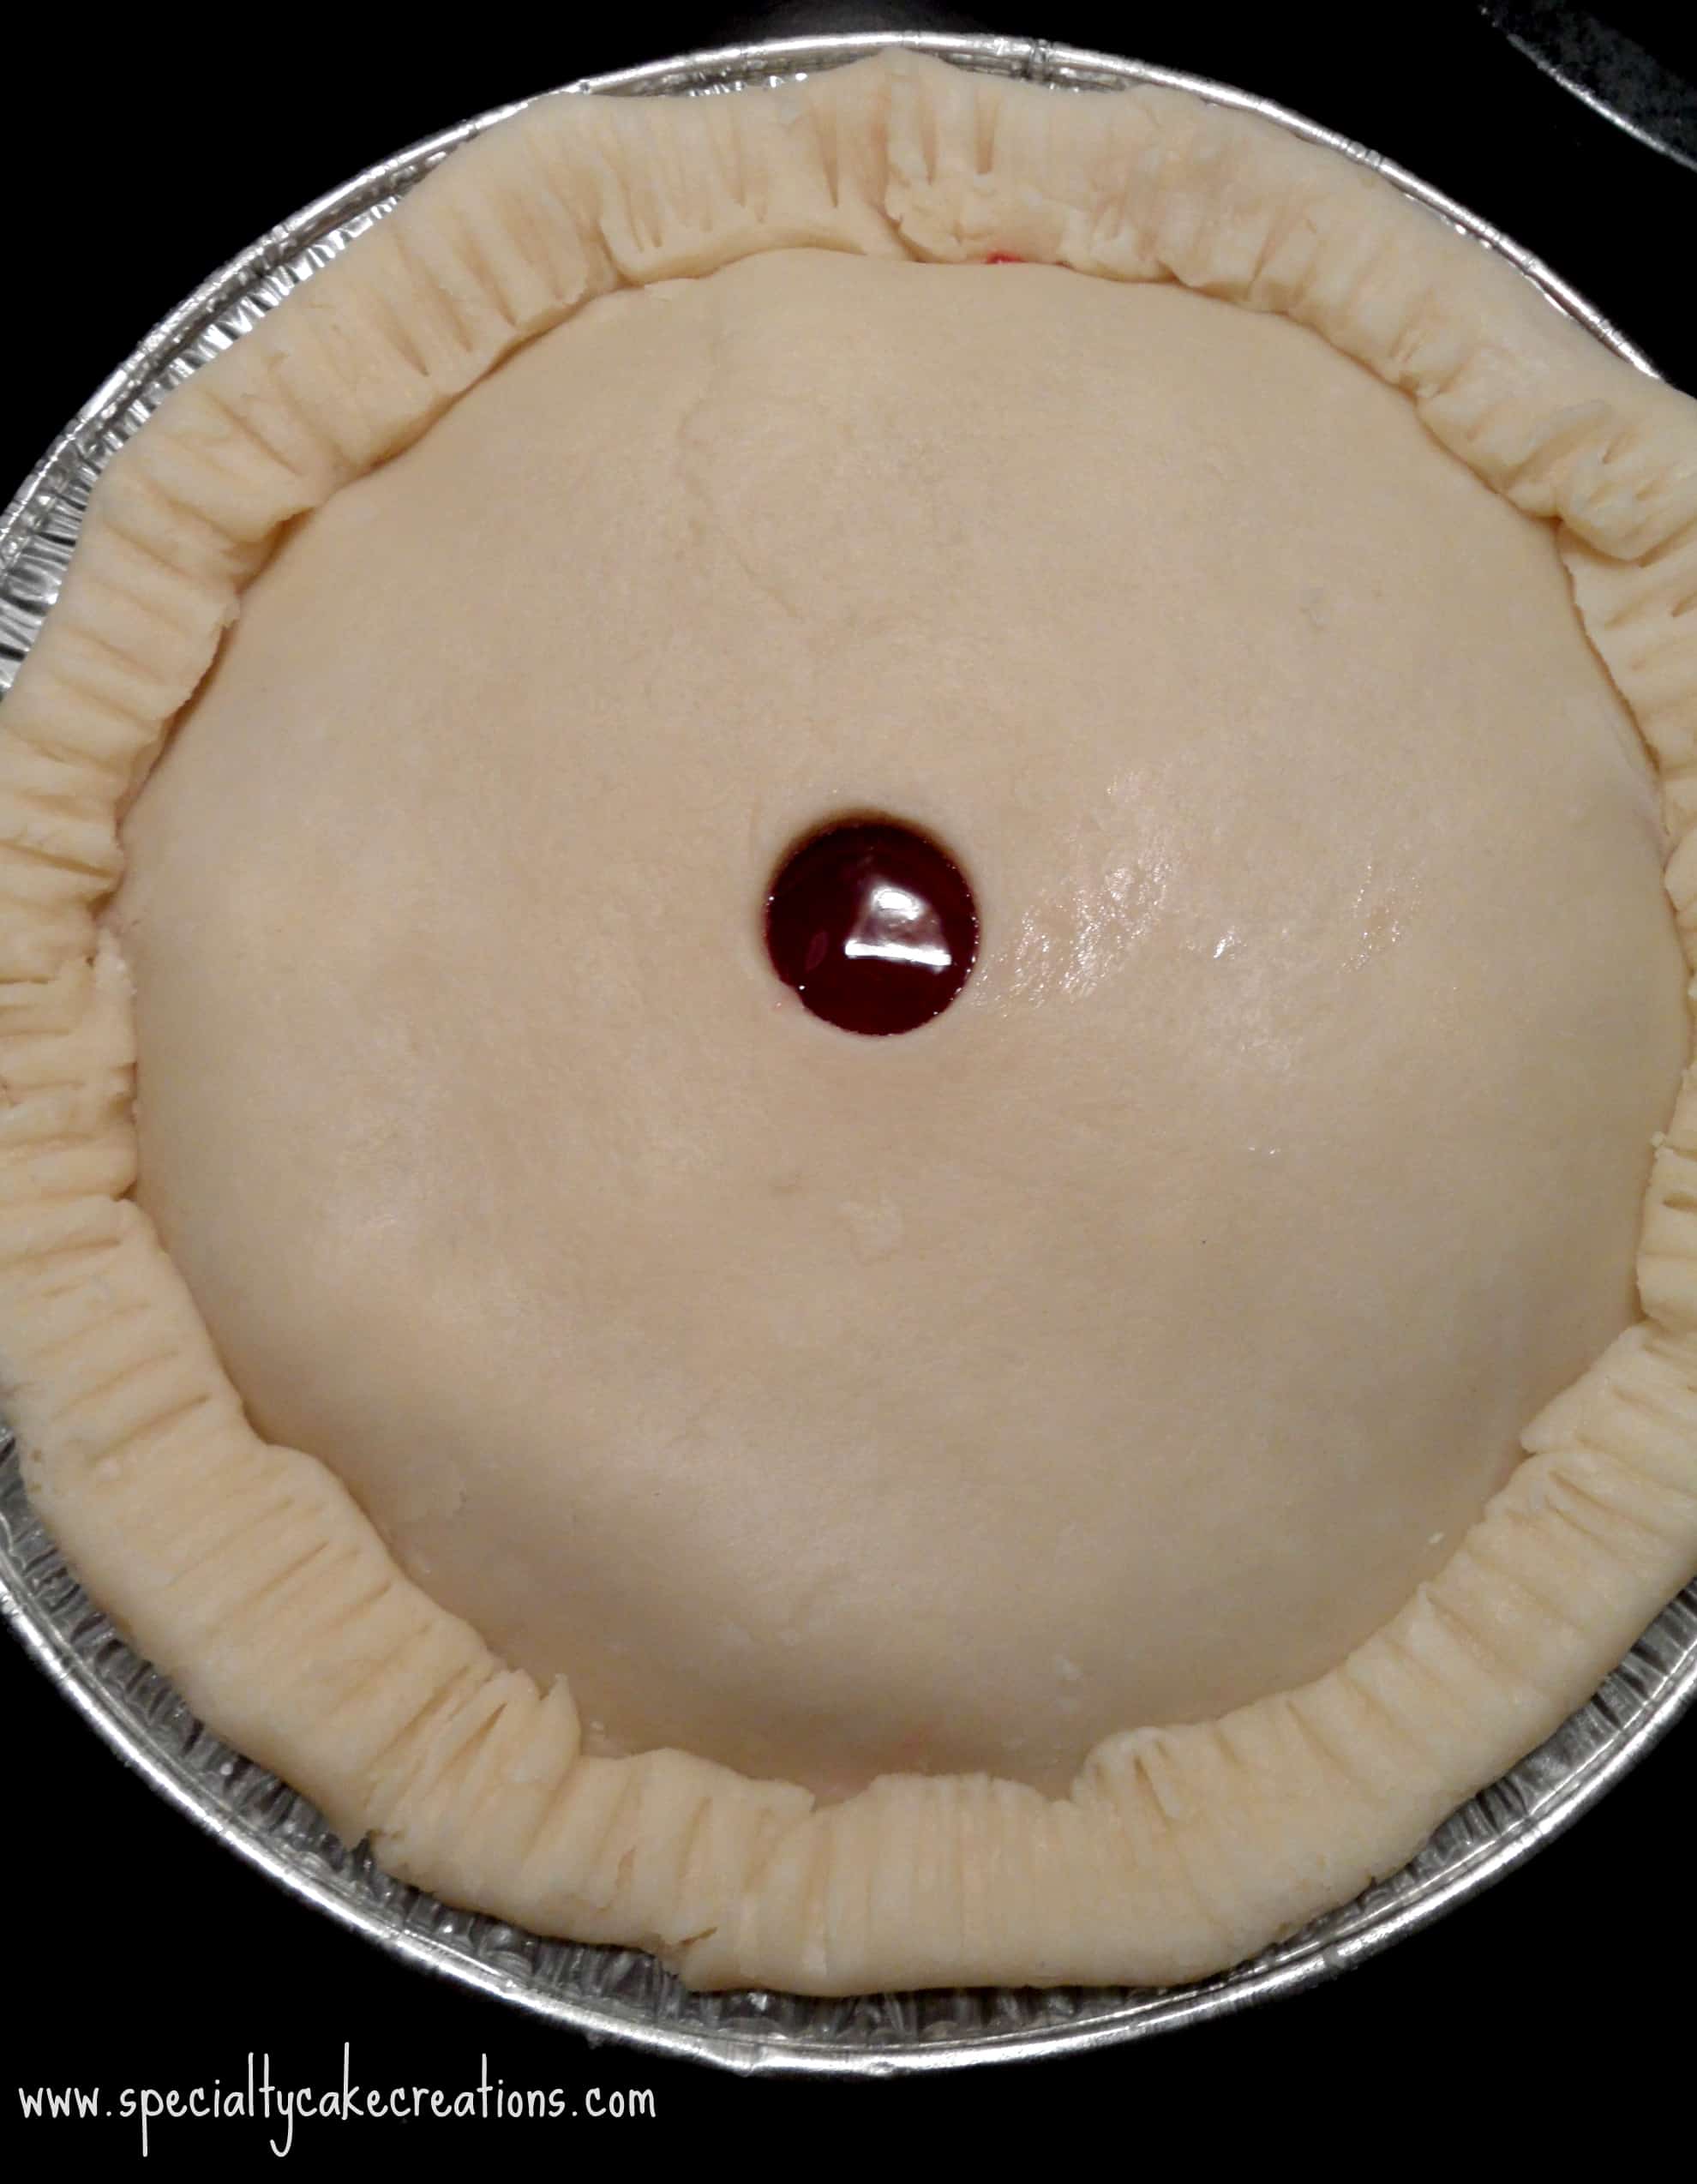 Assembled Pie Before Baking